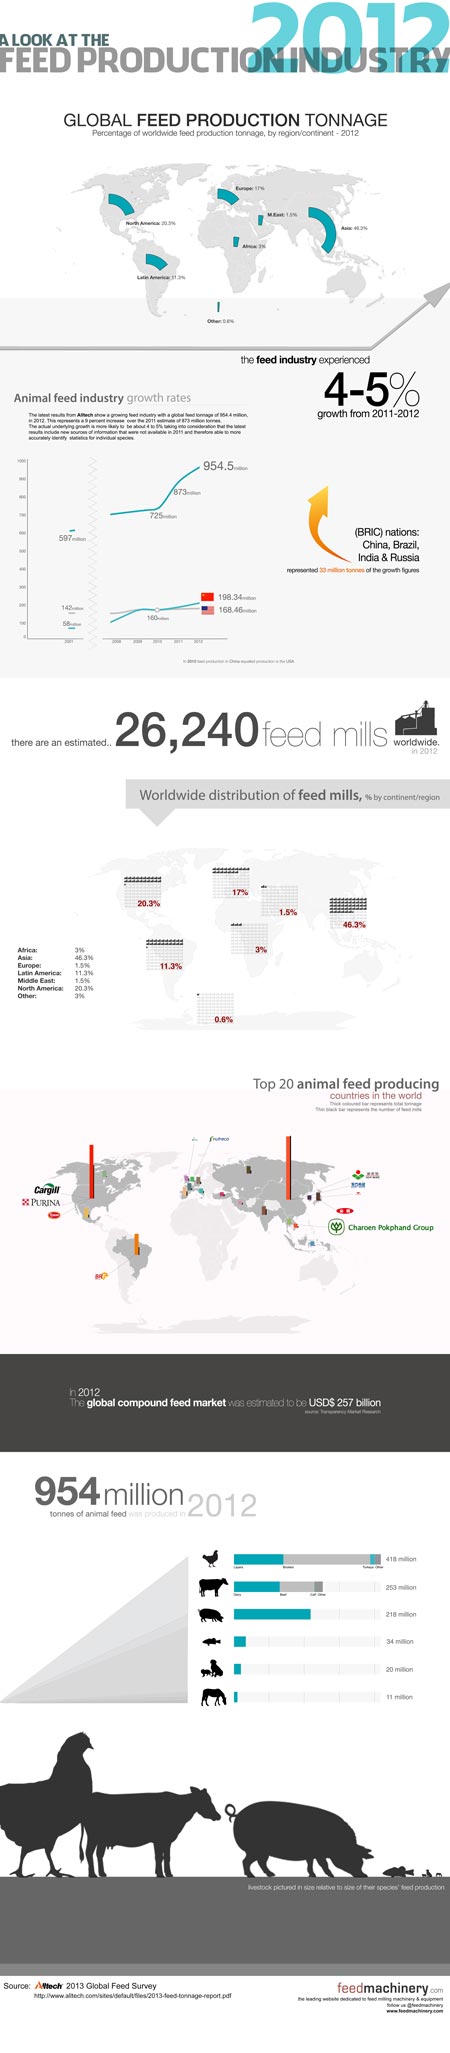 Infographic: A look at the global feed production 2012 | home Articles